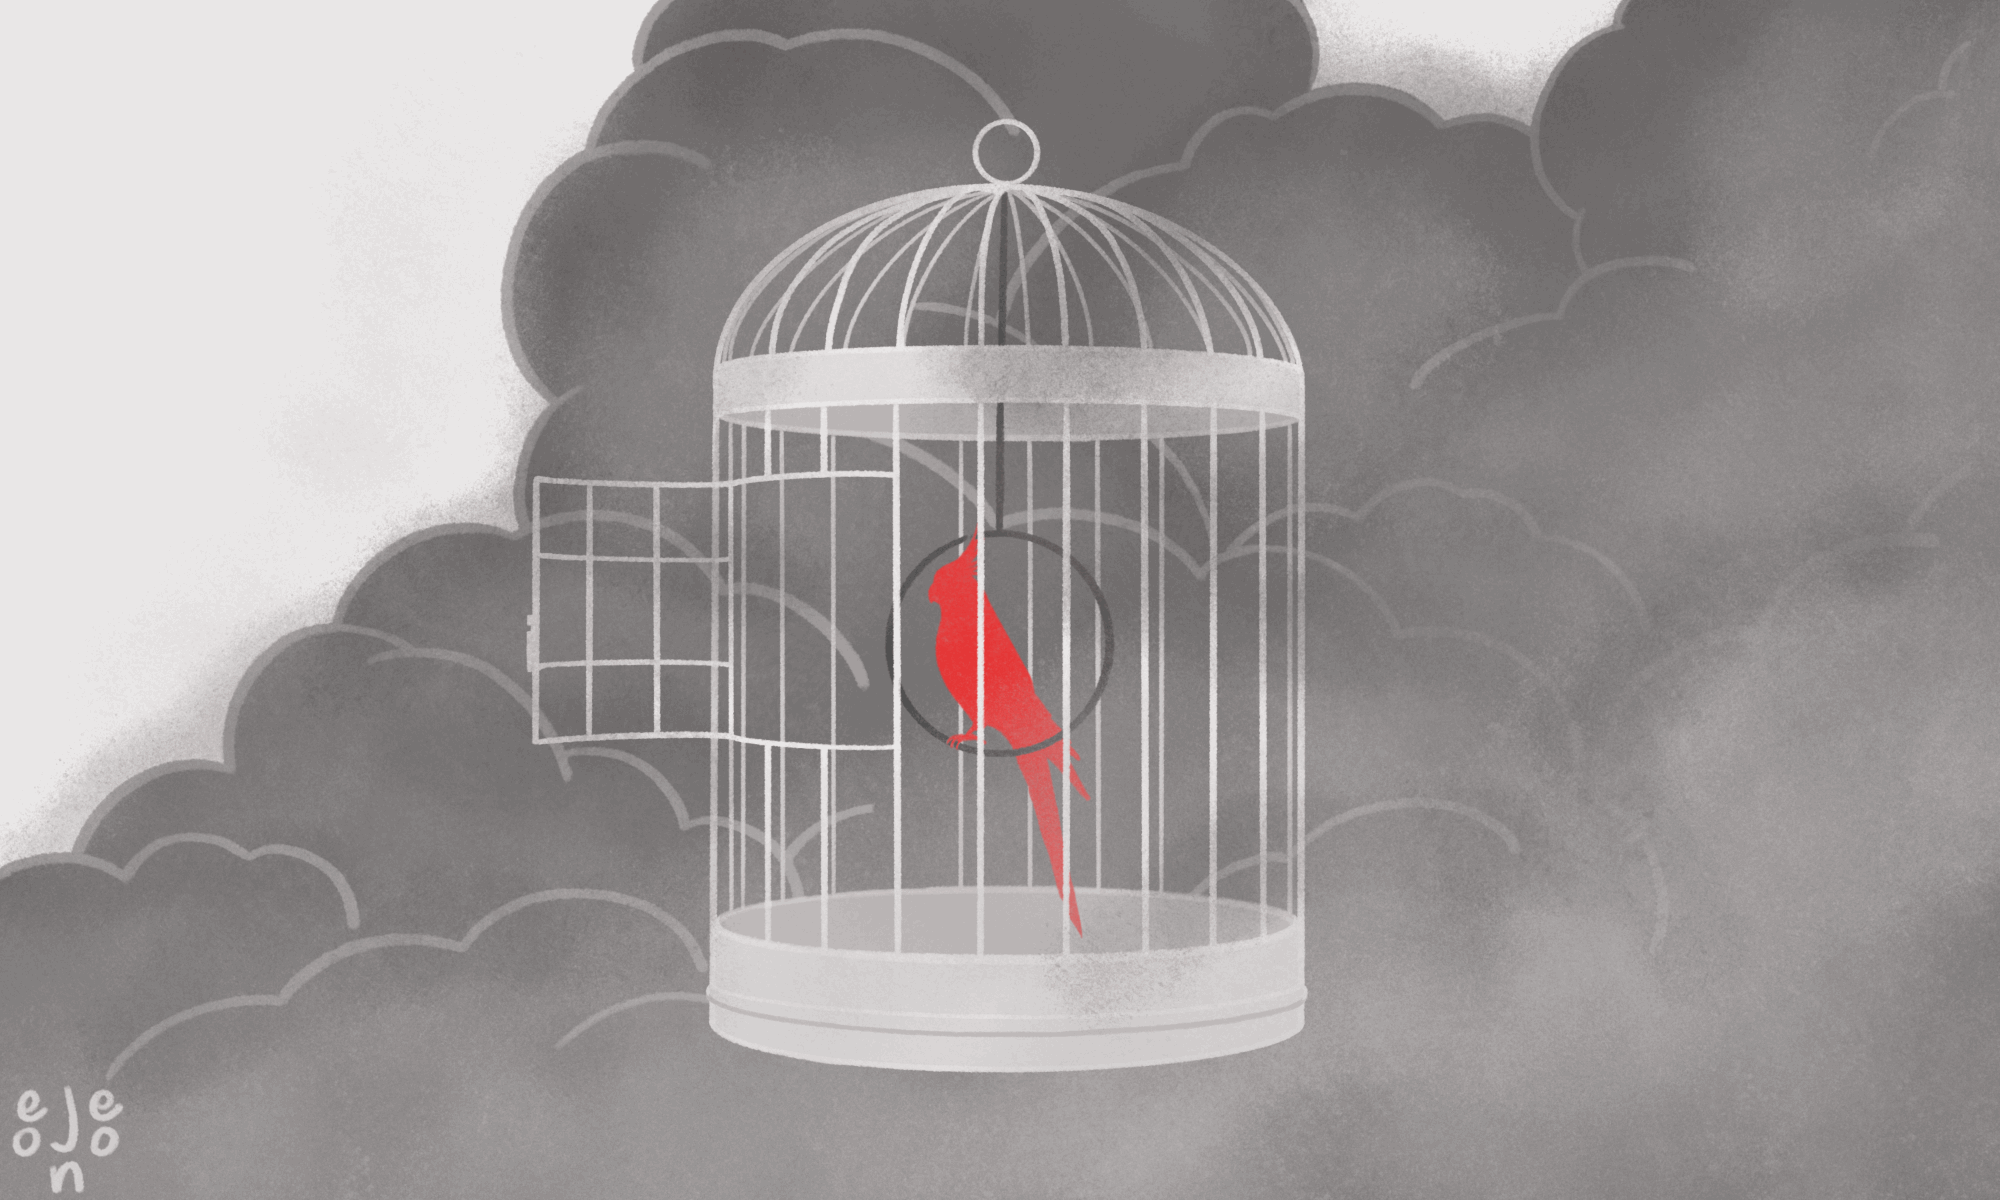 An animation of a bird in a cage. There are smoke clouds filling the background, and the cage’s door is open so the bird can escape.